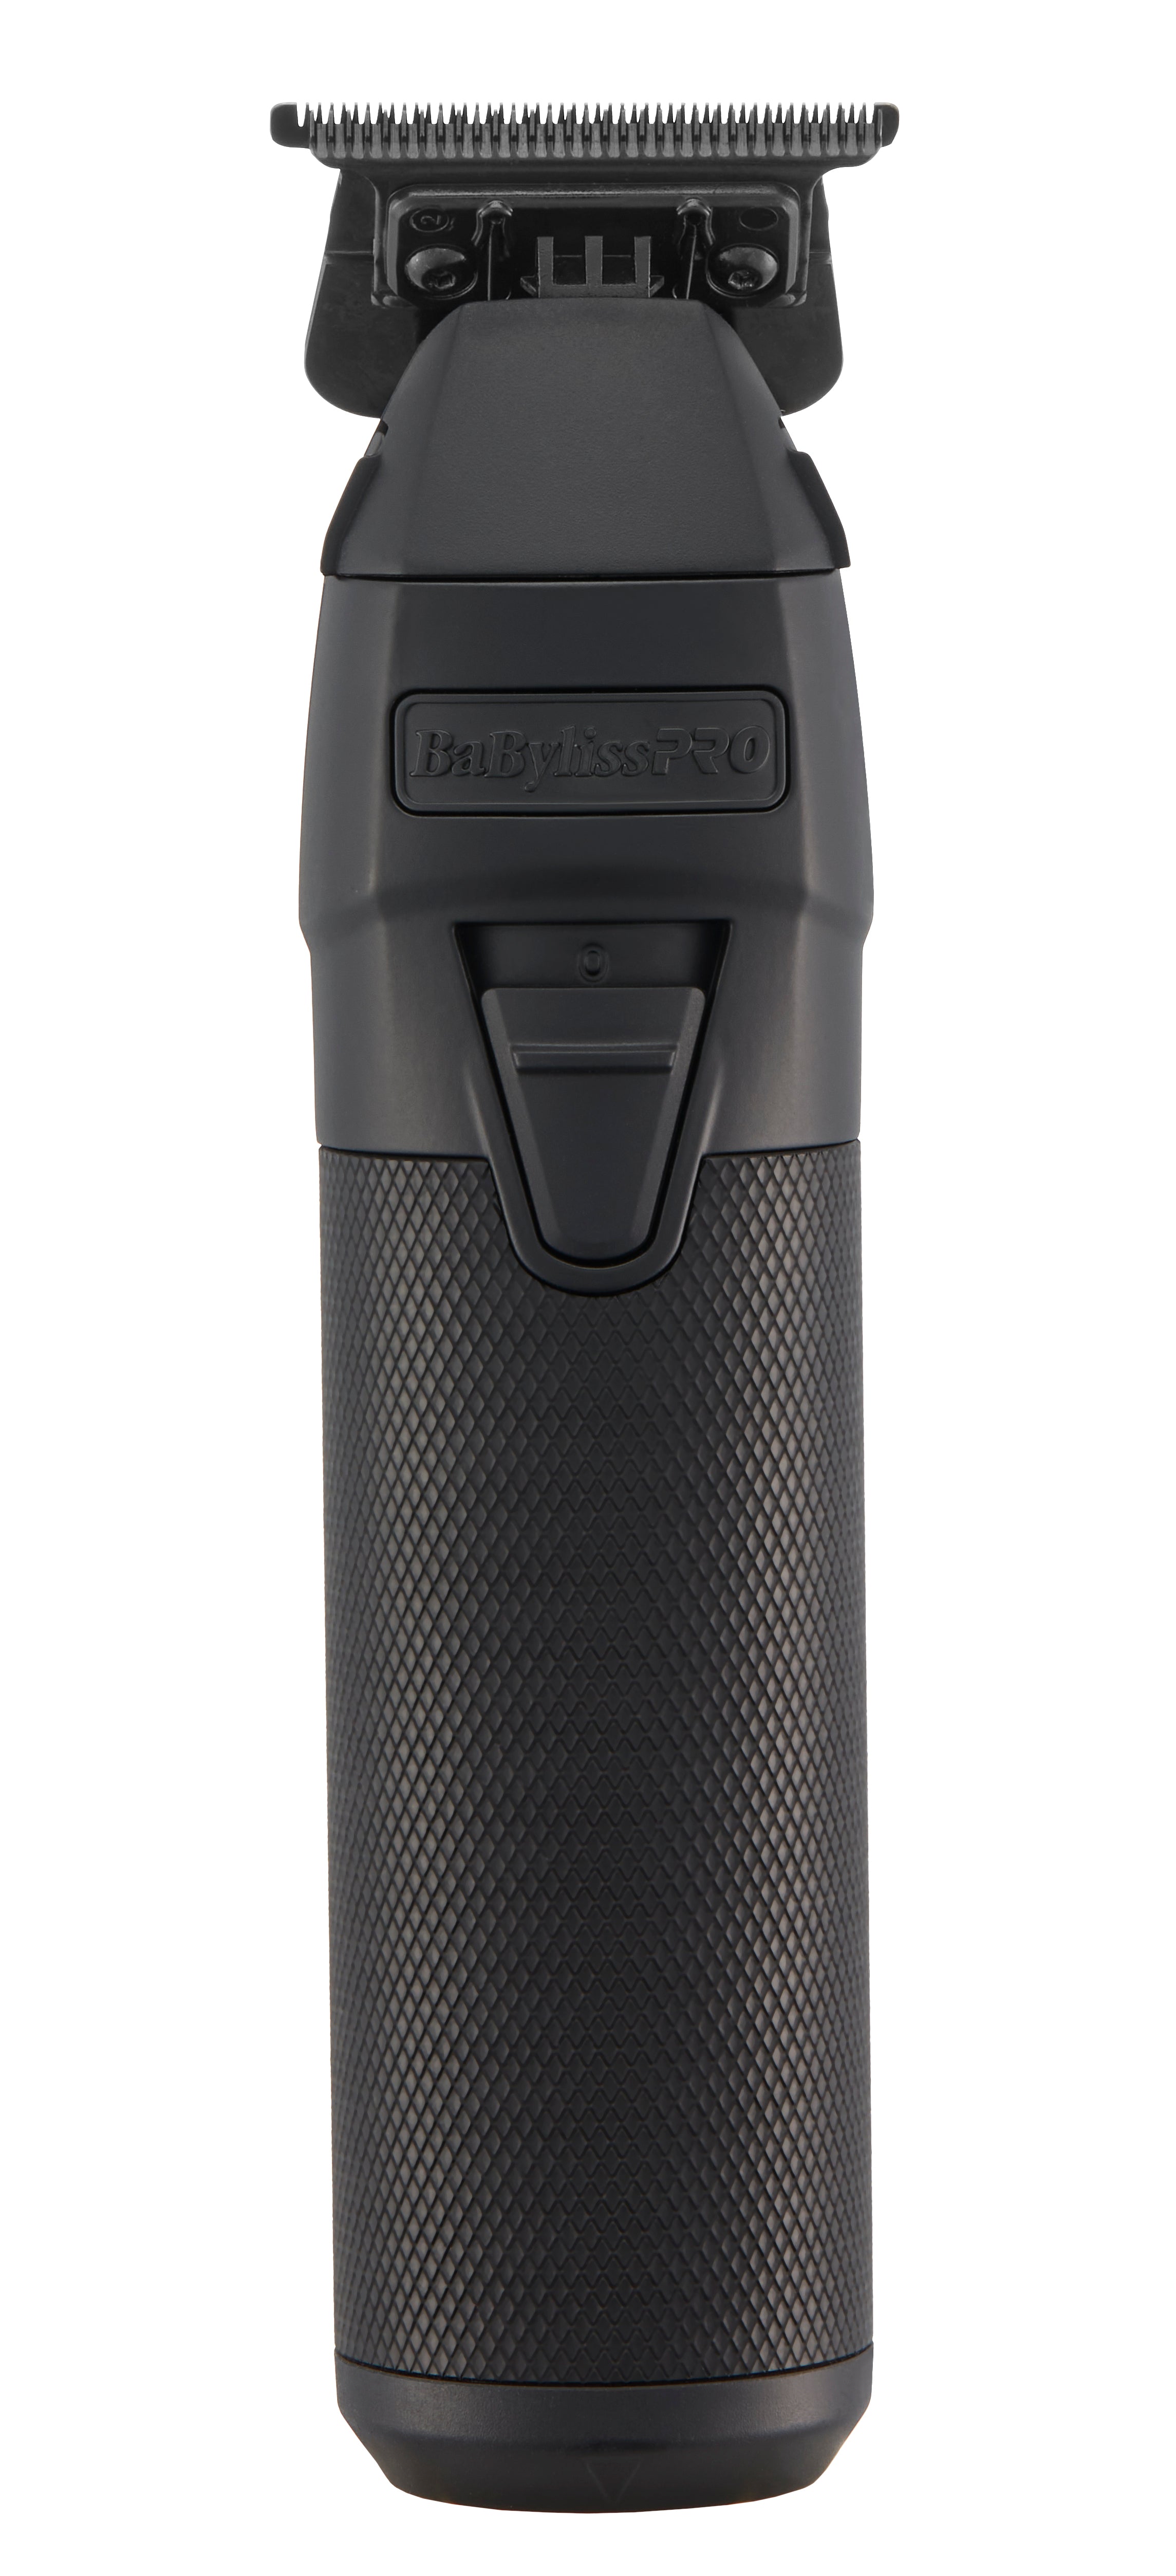 BaByliss PRO Black FX One All-Metal Interchangeable-Battery Cordless  Trimmer (FX799MB)